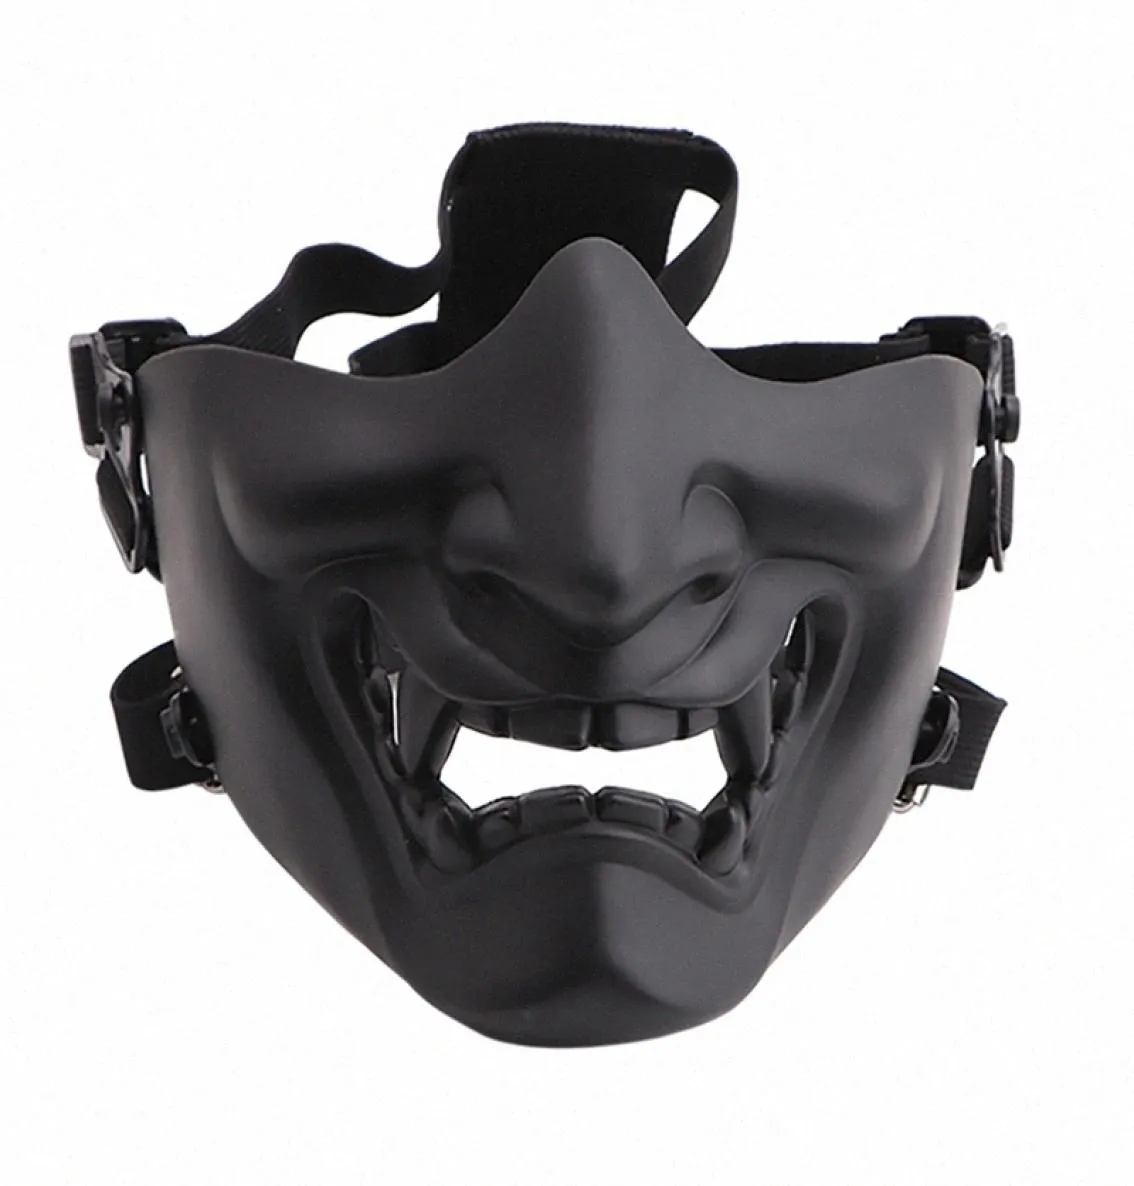 Scary Smiling Ghost Half Face Mask Shape Justerbar Tactical Headwear Protection Halloween Costumes Accessories Avae7842236